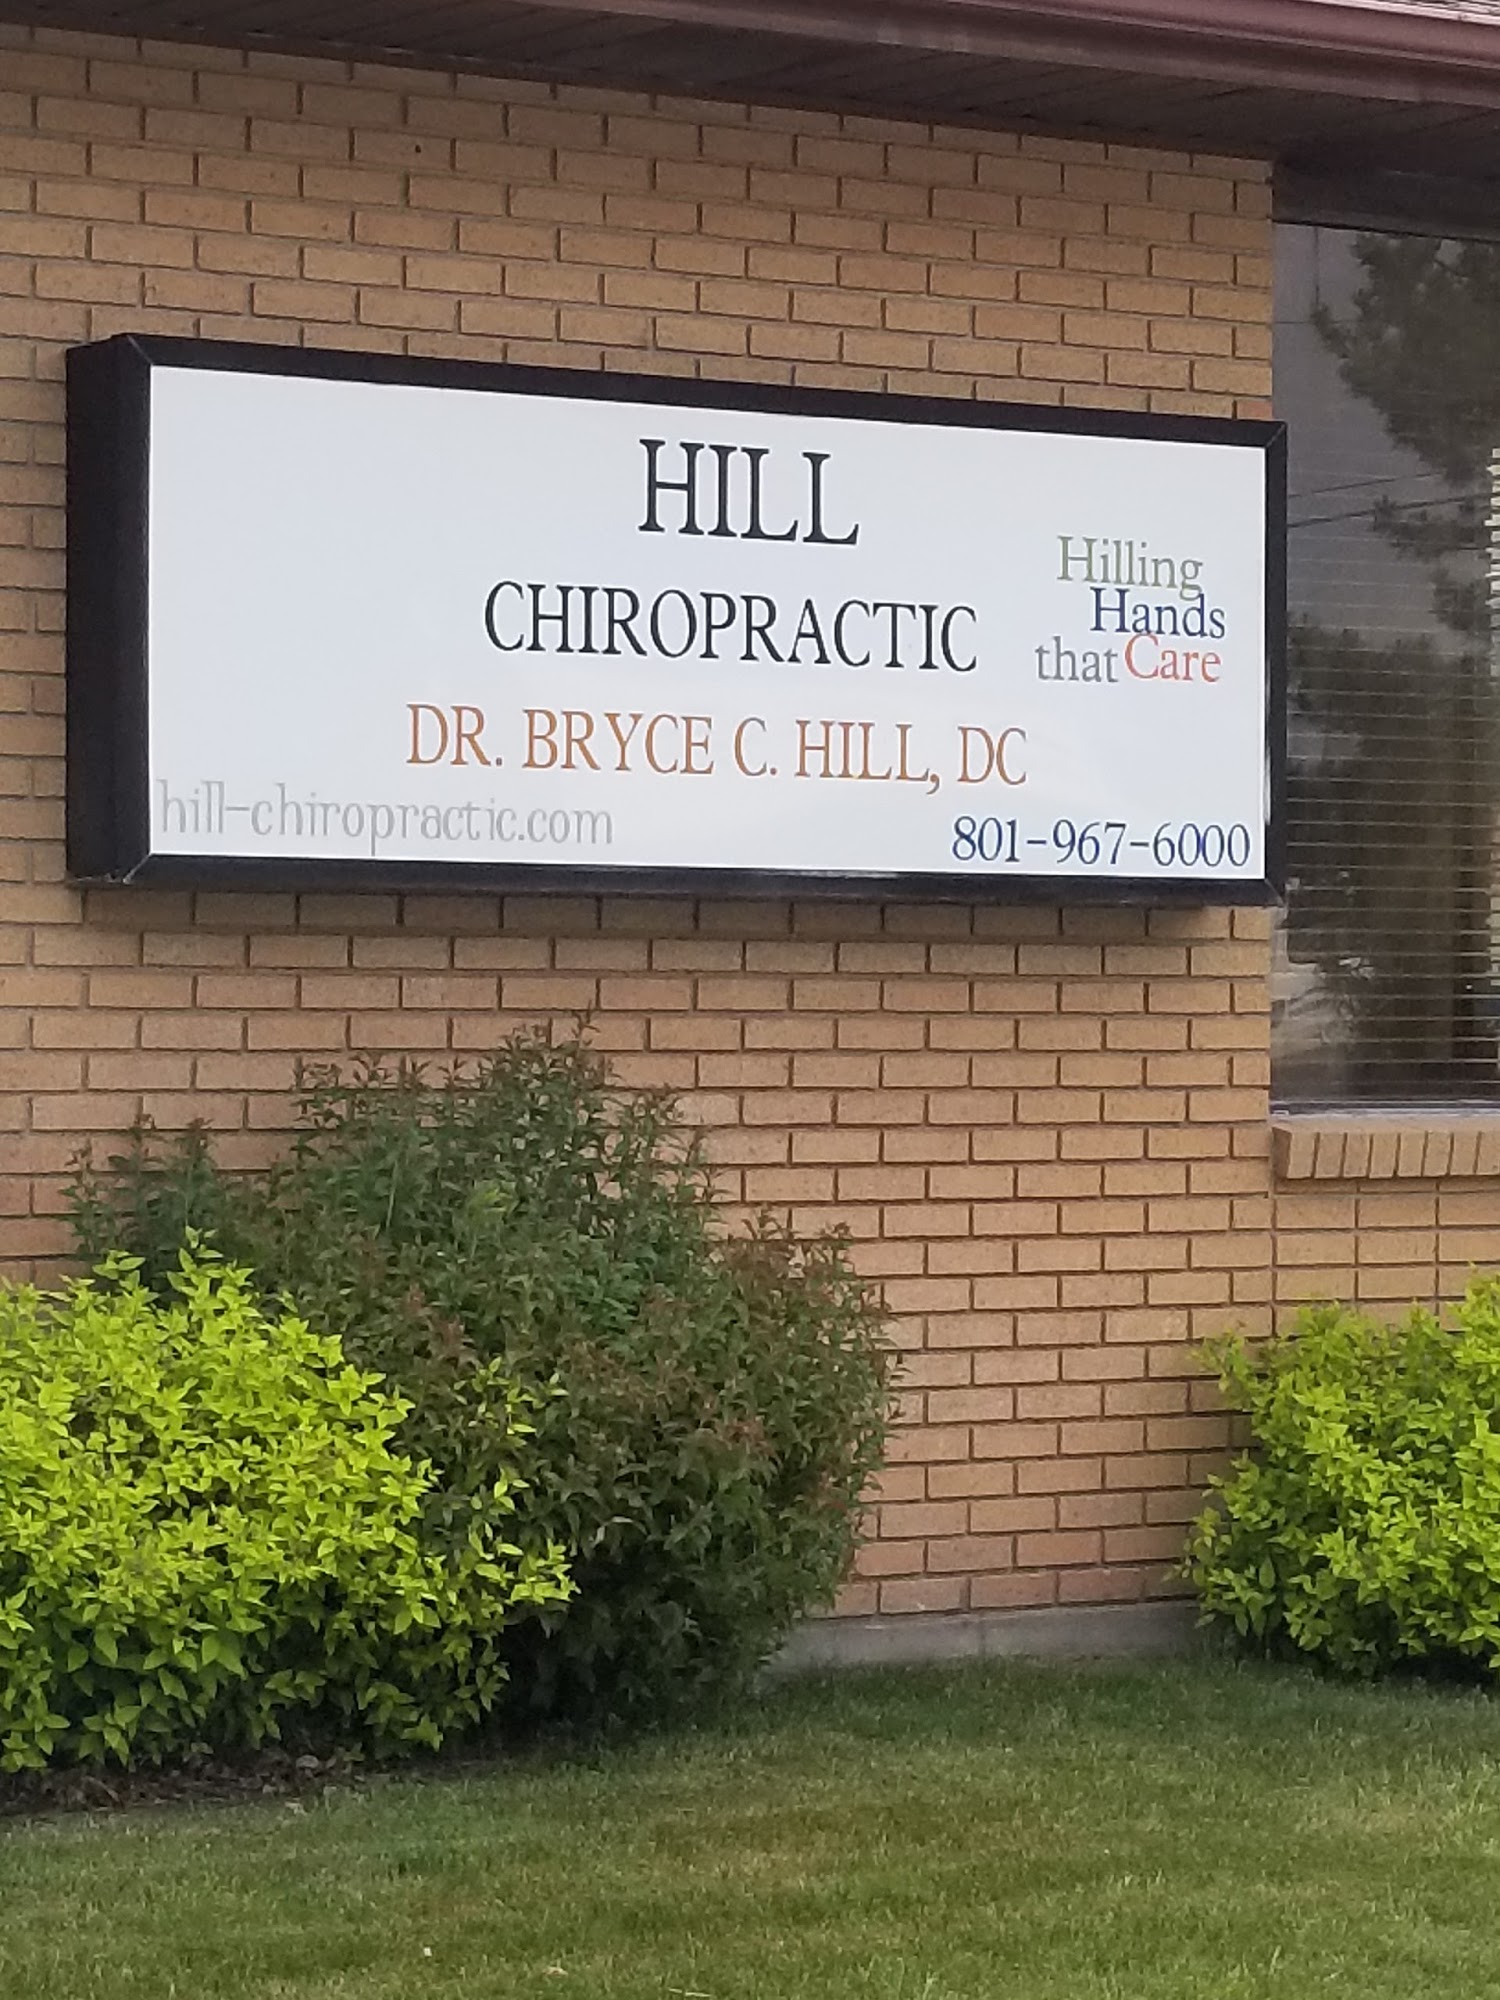 Hill Chiropractic - Dr. Bryce Hill